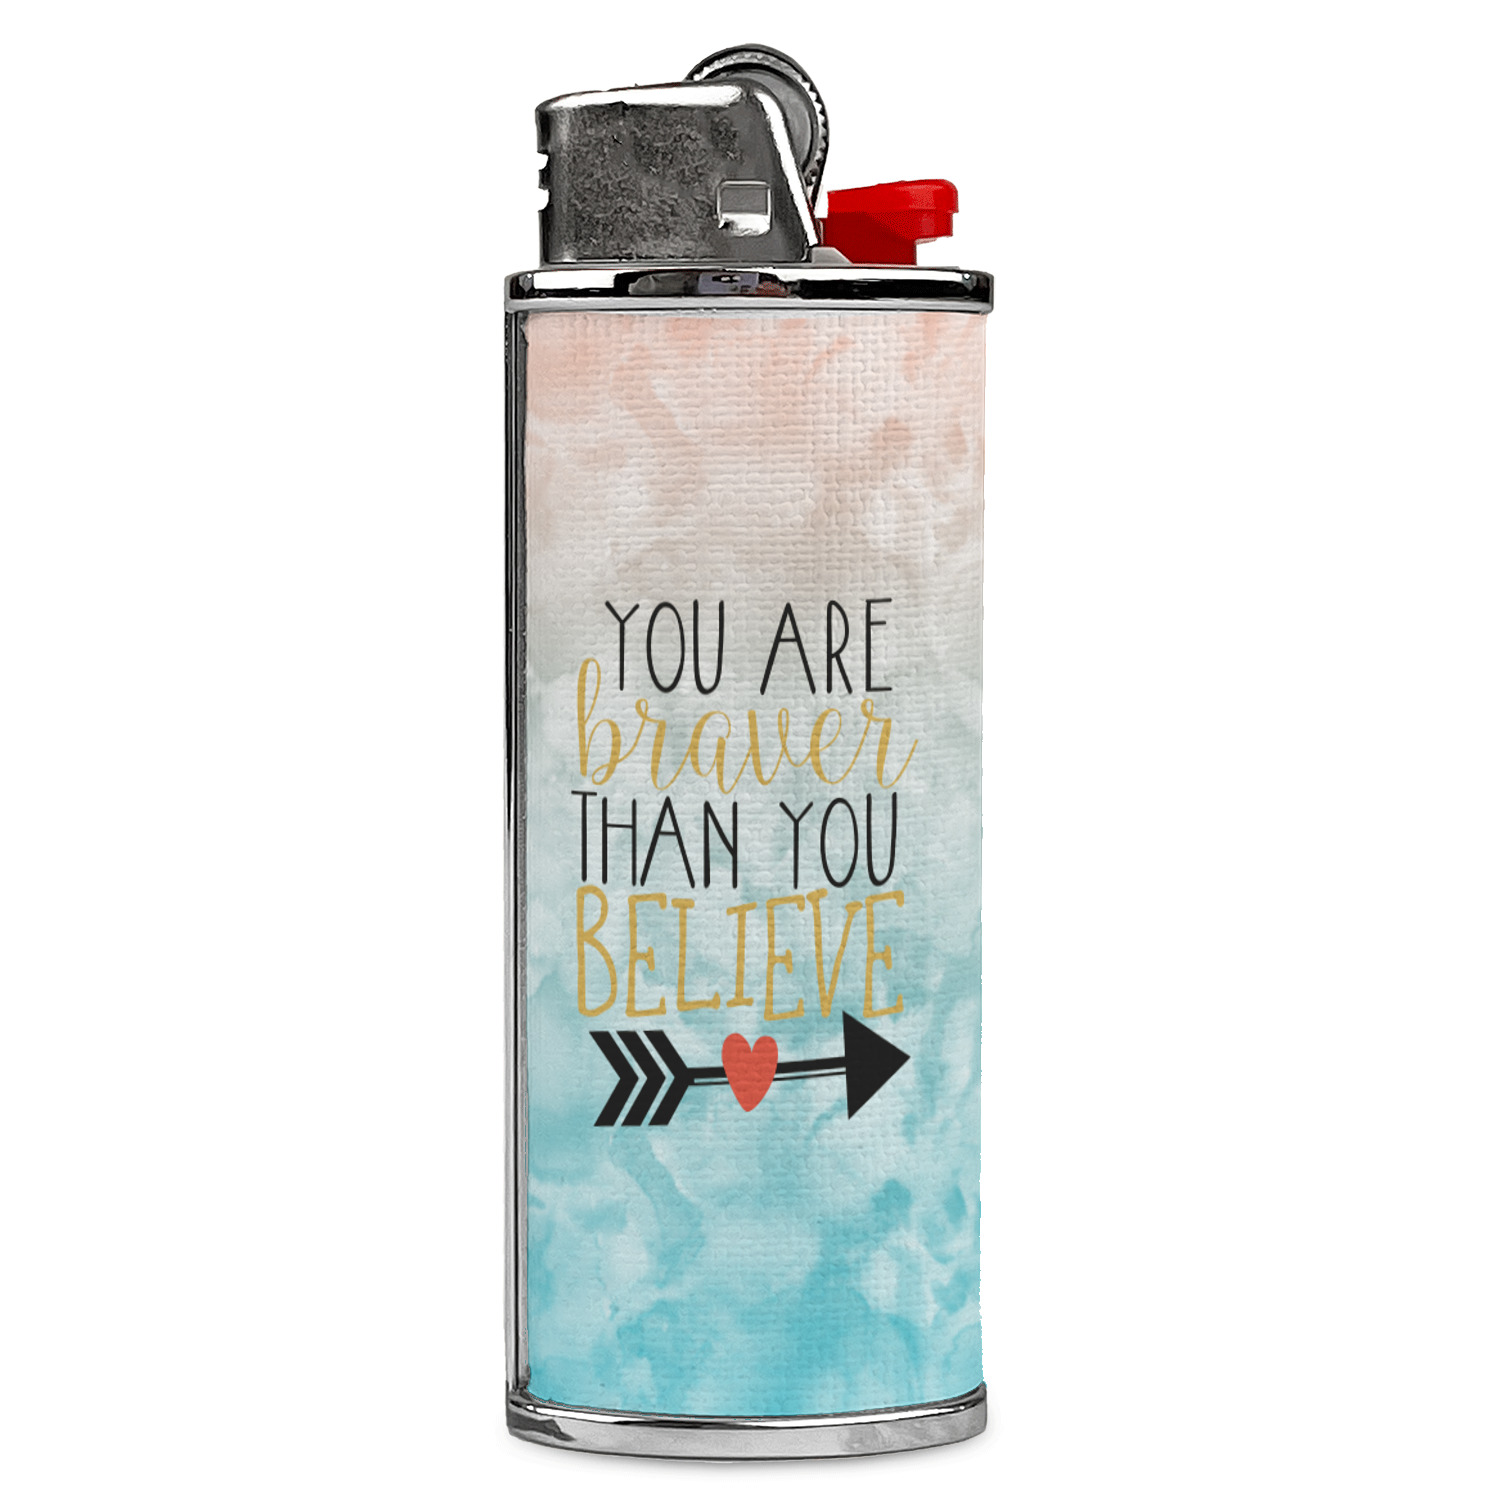 Custom Inspirational Quotes for Lighters |